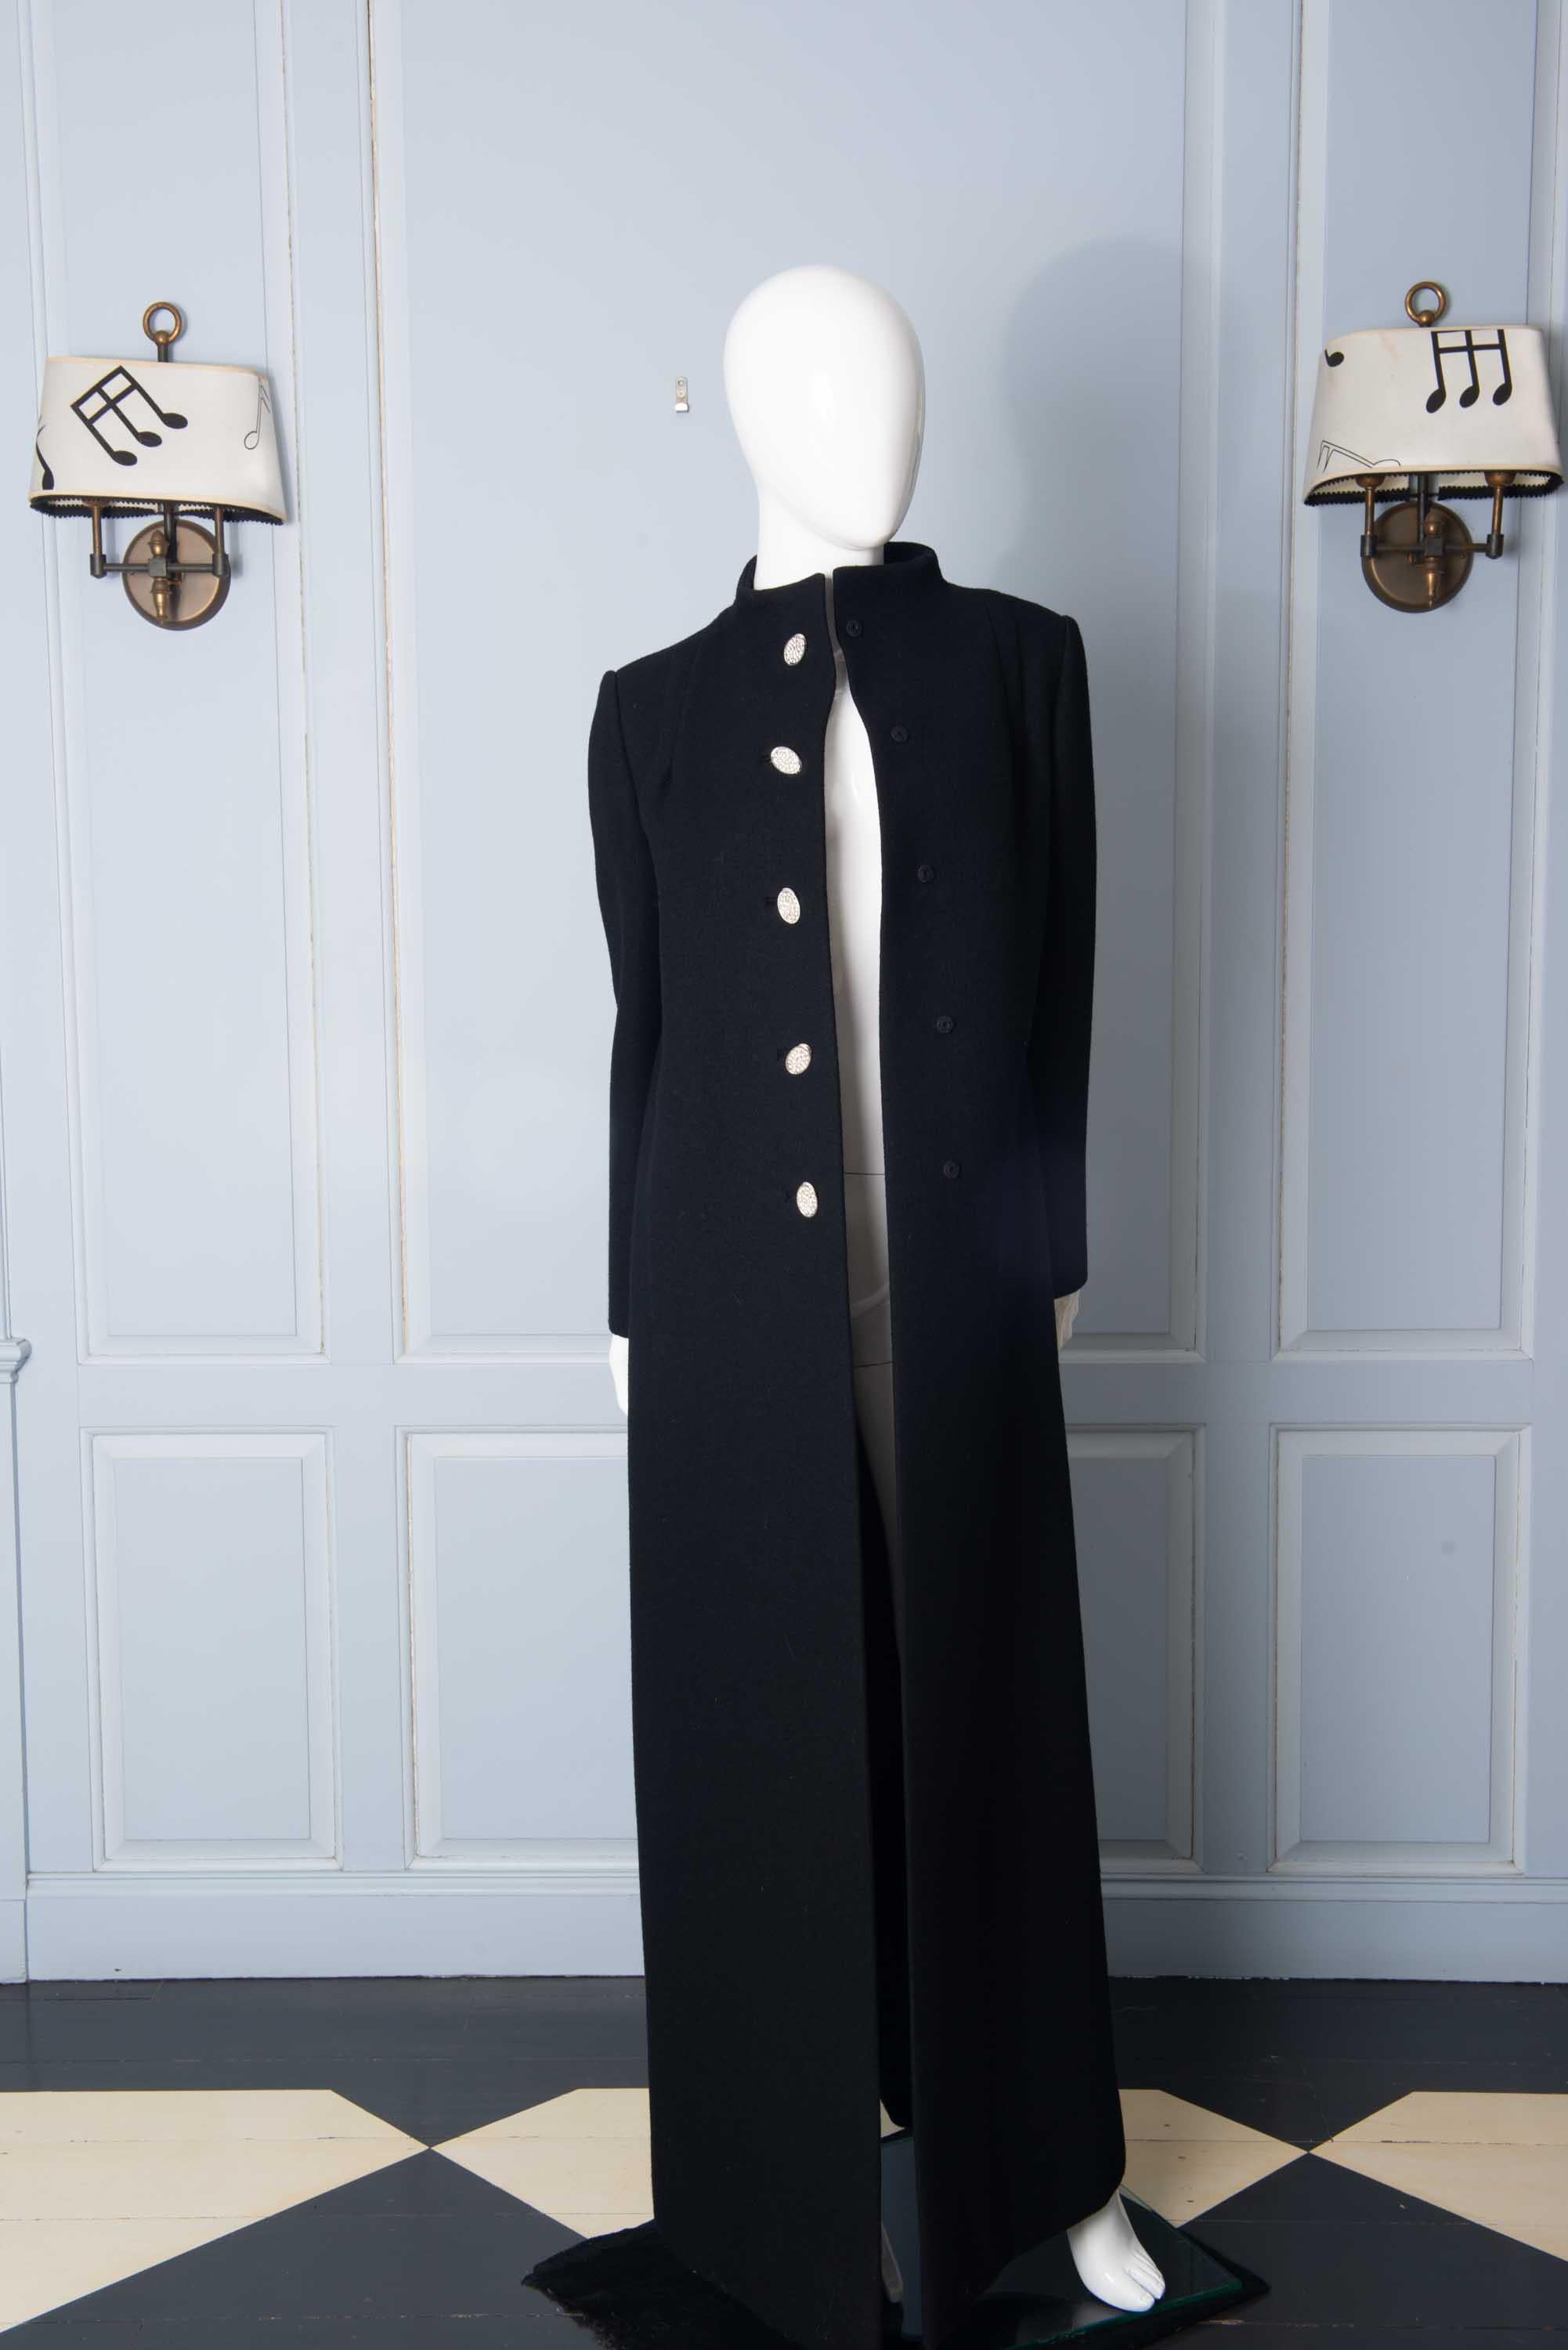 Classic Pauline Trigere Black Wool Evening Coat with Oval Rhinestone buttons.